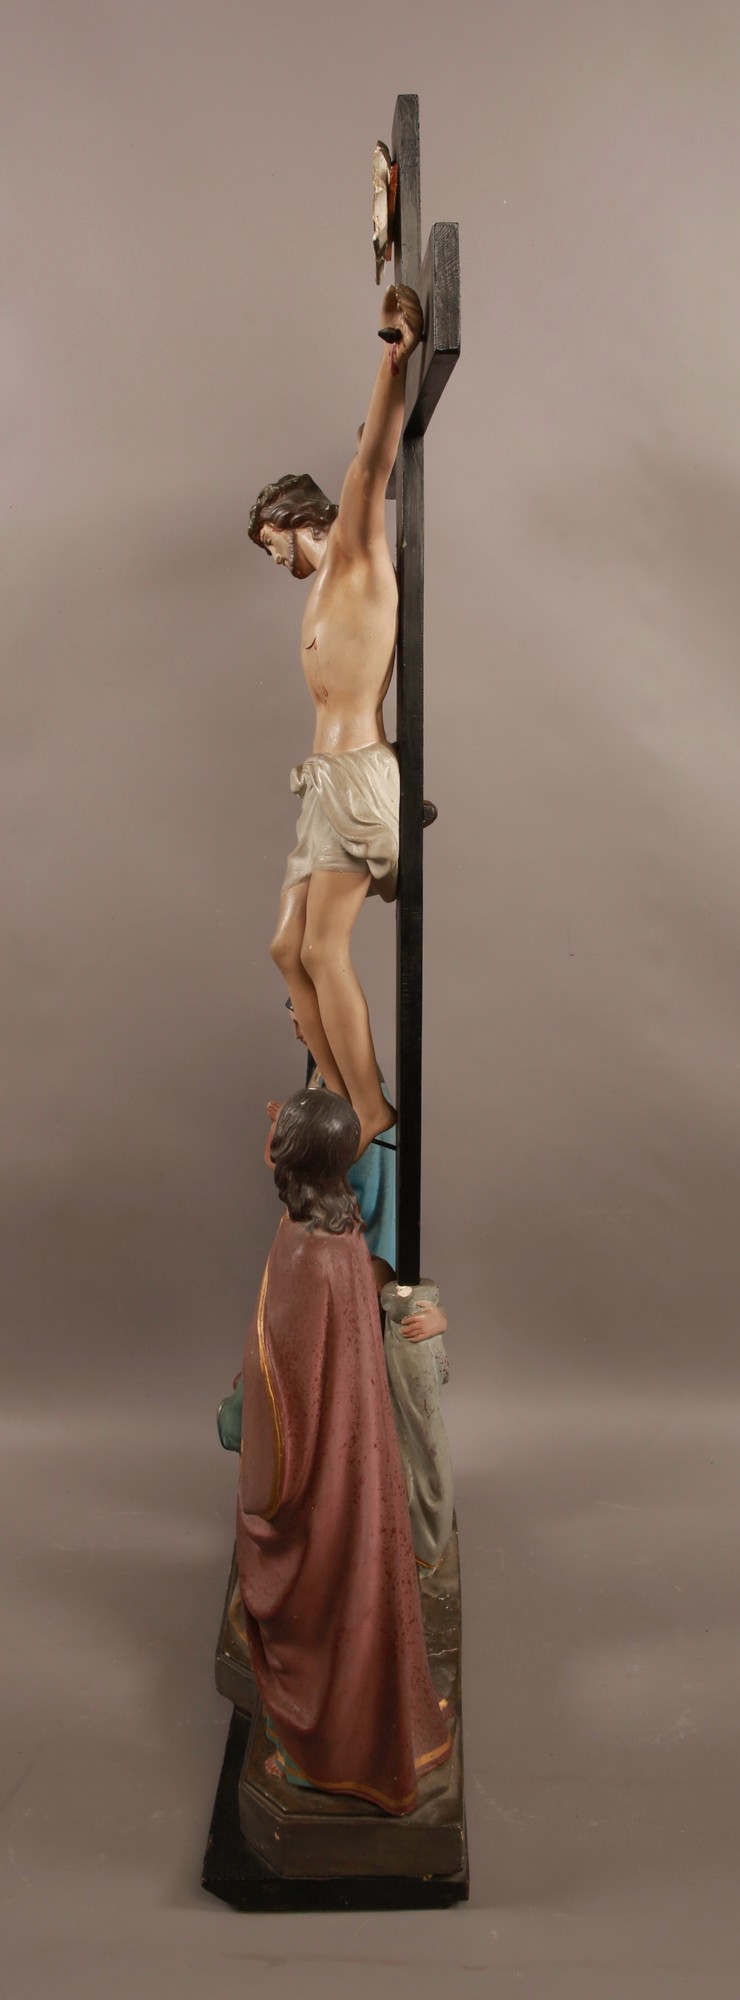 A Large Religious Statue of Jesus on the Cross Early 1900s 115cm Tall #93 - Image 3 of 6